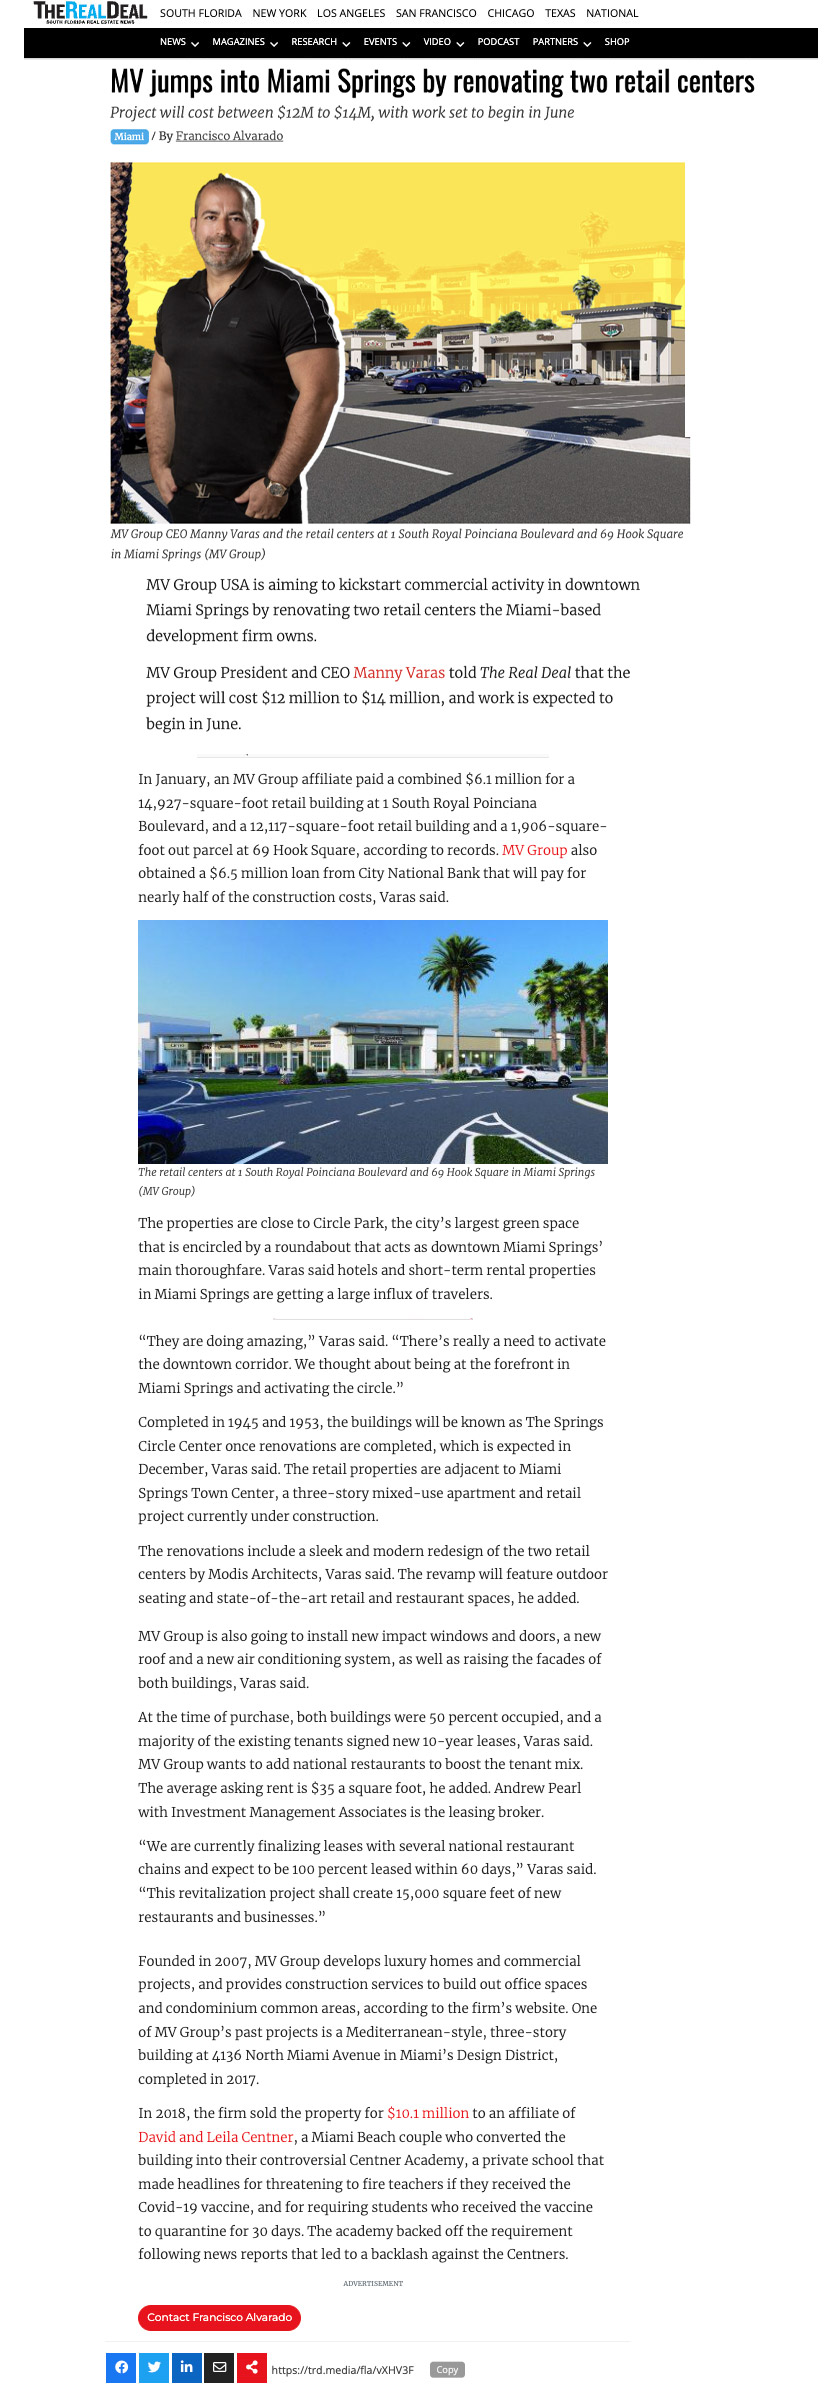 The Real Deal – MV jumps into Miami Springs by renovating two retail centers